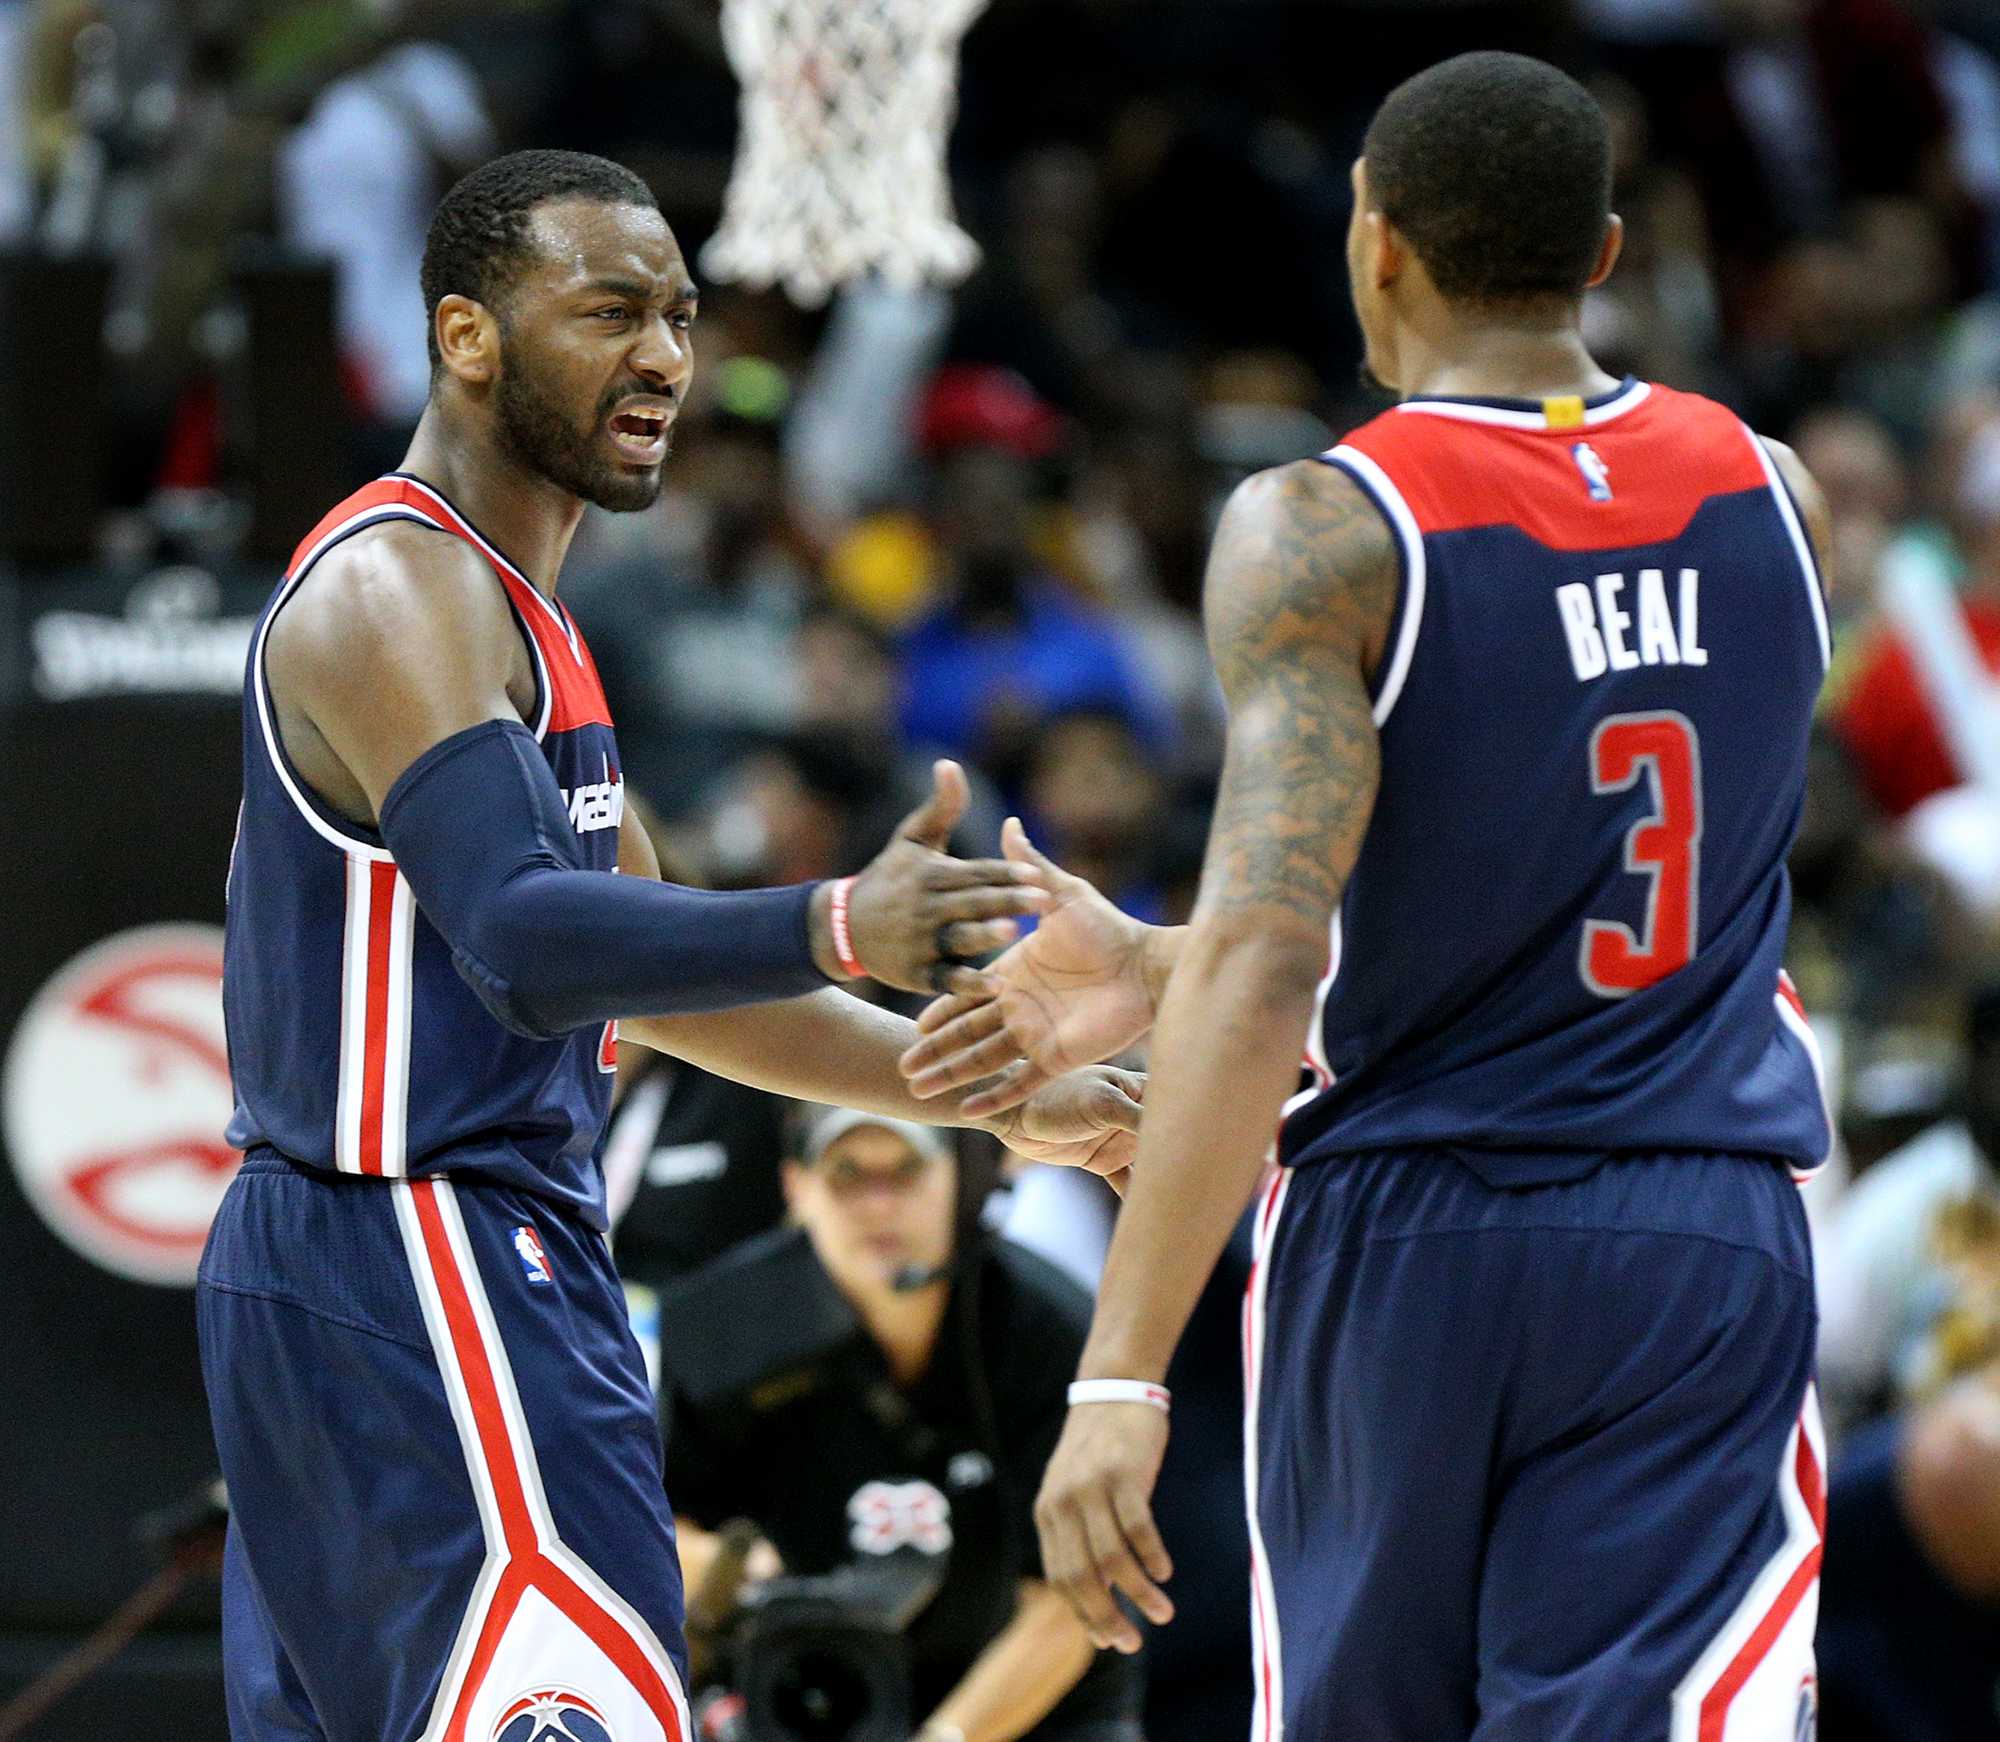 The Washington Wizards John Wall, left, and Bradley Beal (3) celebrate a 115-99 series-clinching victory against the Atlanta Hawks in Game 6 of the Eastern Conference quarterfinals on Friday, April 28, 2017, at Philips Arena in Atlanta. (Curtis Compton/Atlanta Journal-Constitution/TNS)